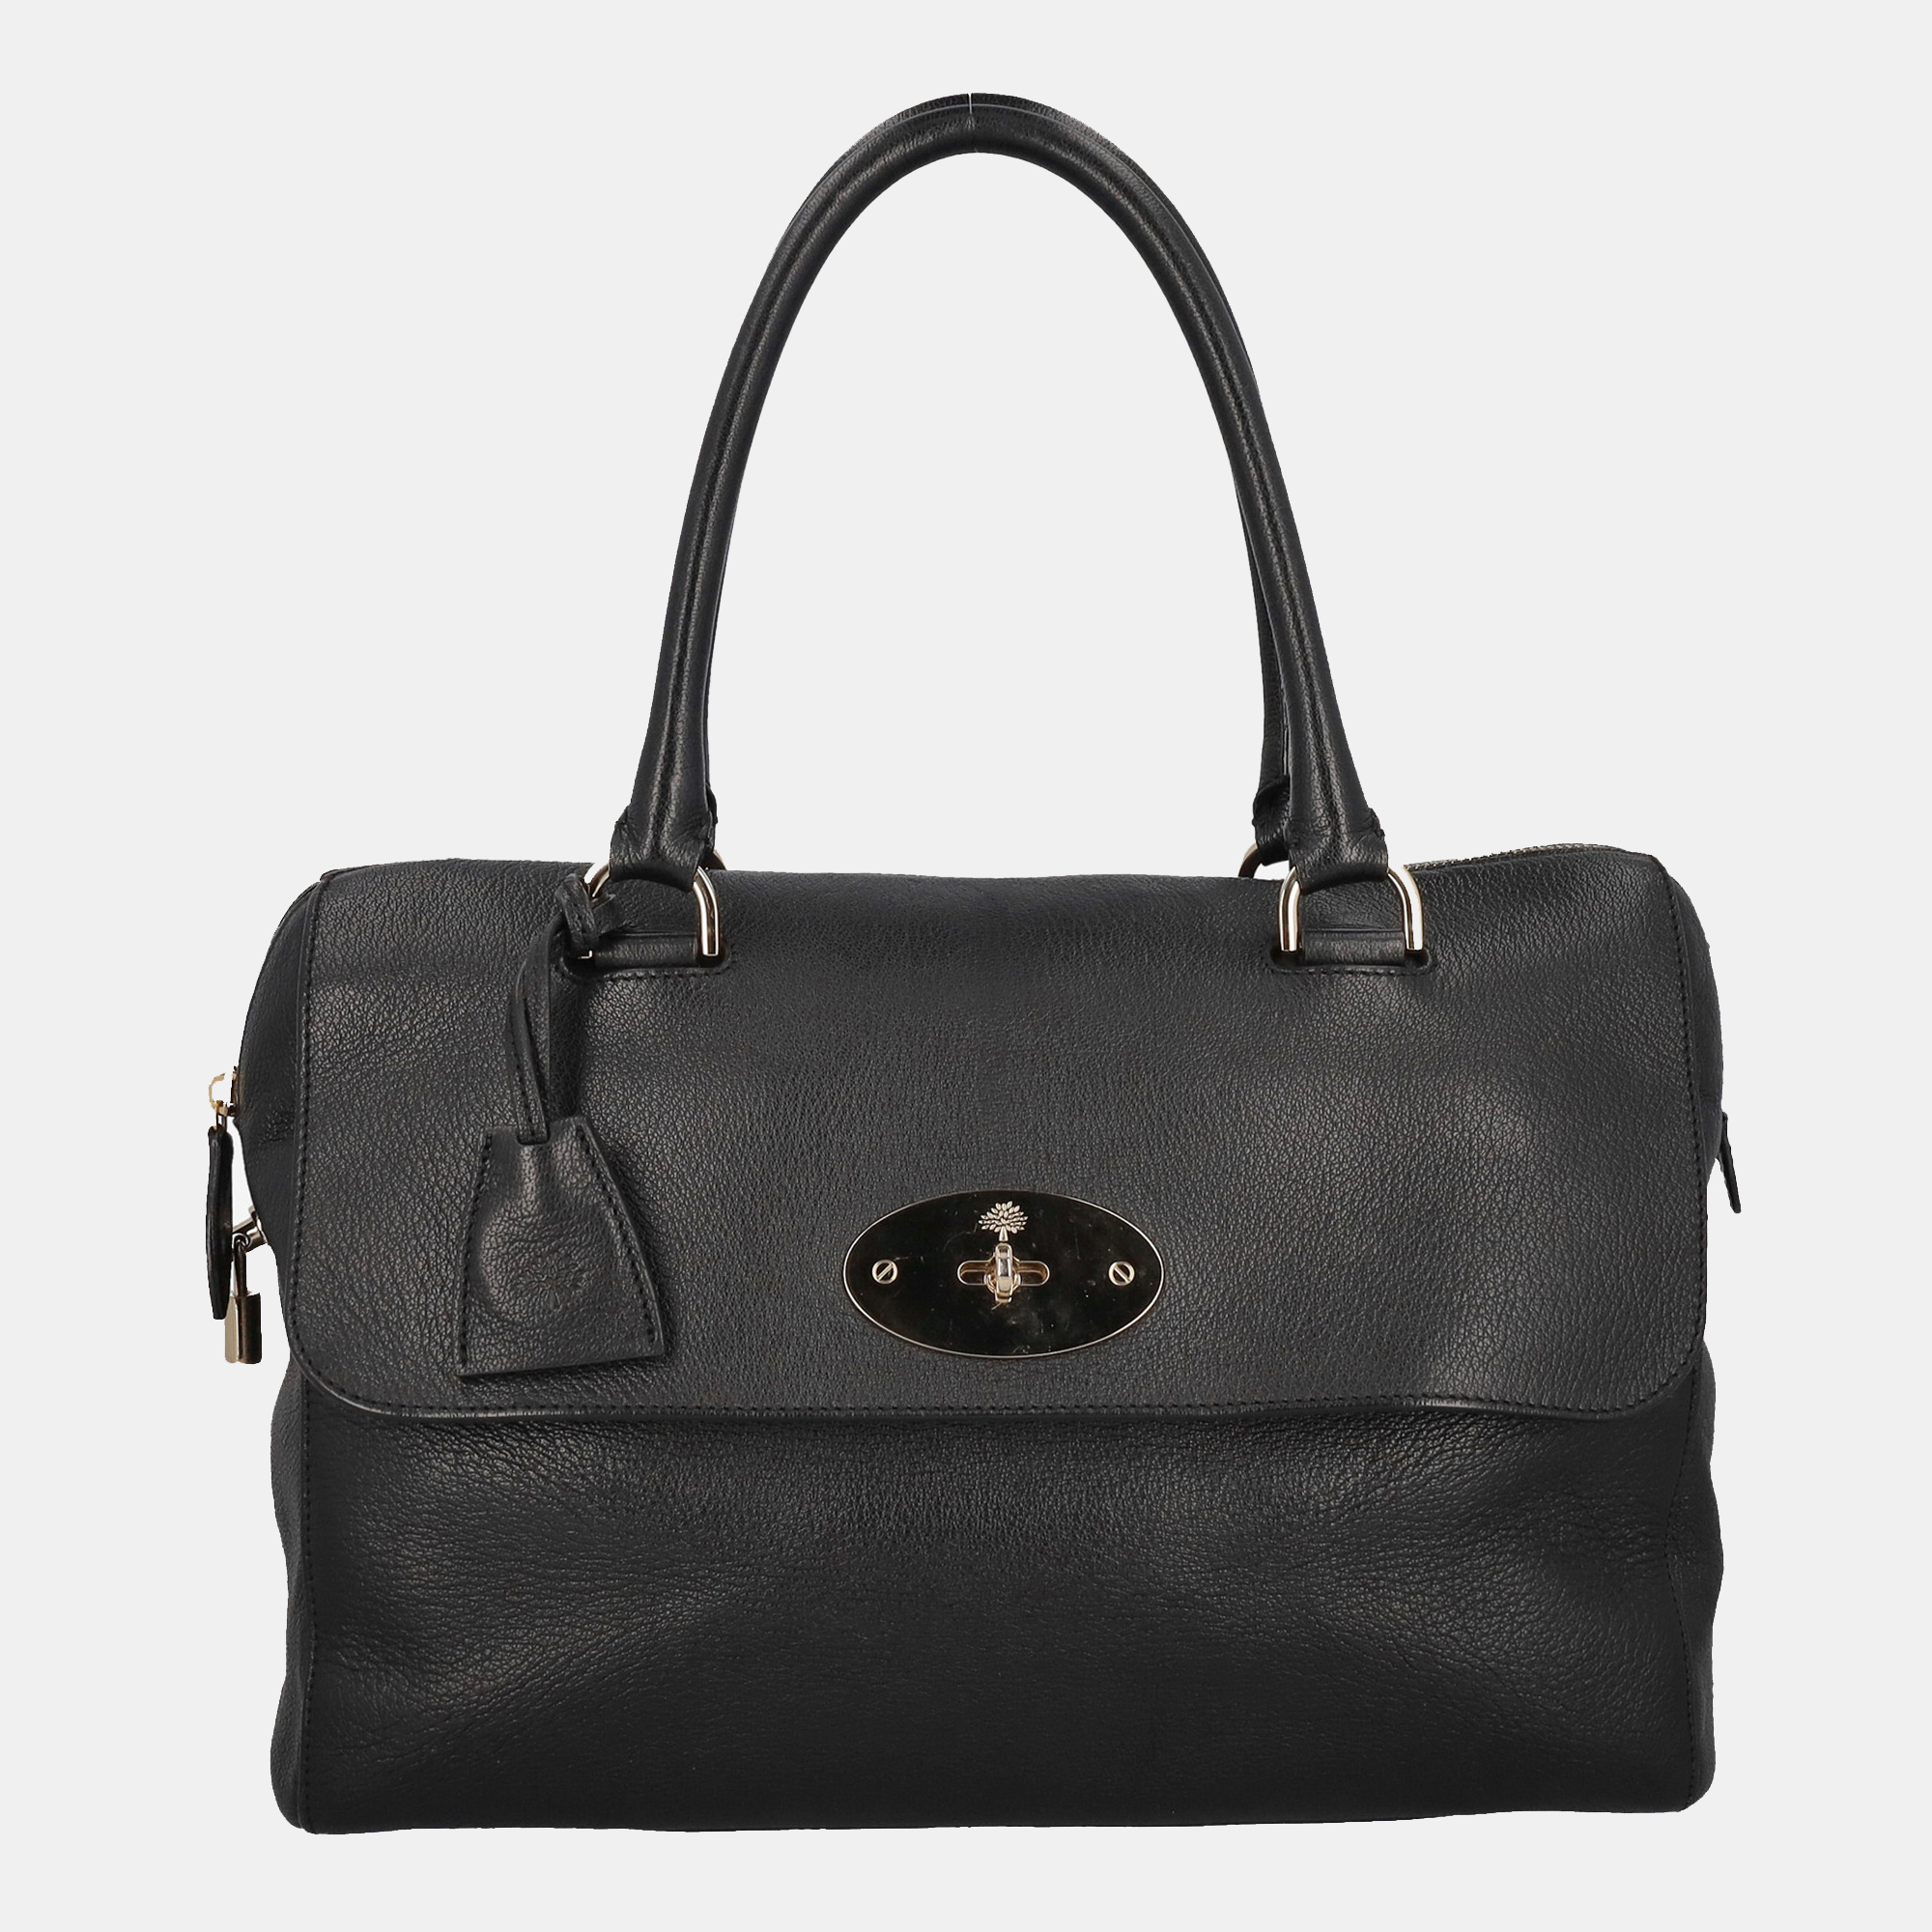 Mulberry  Women's Leather Tote Bag - Black - One Size